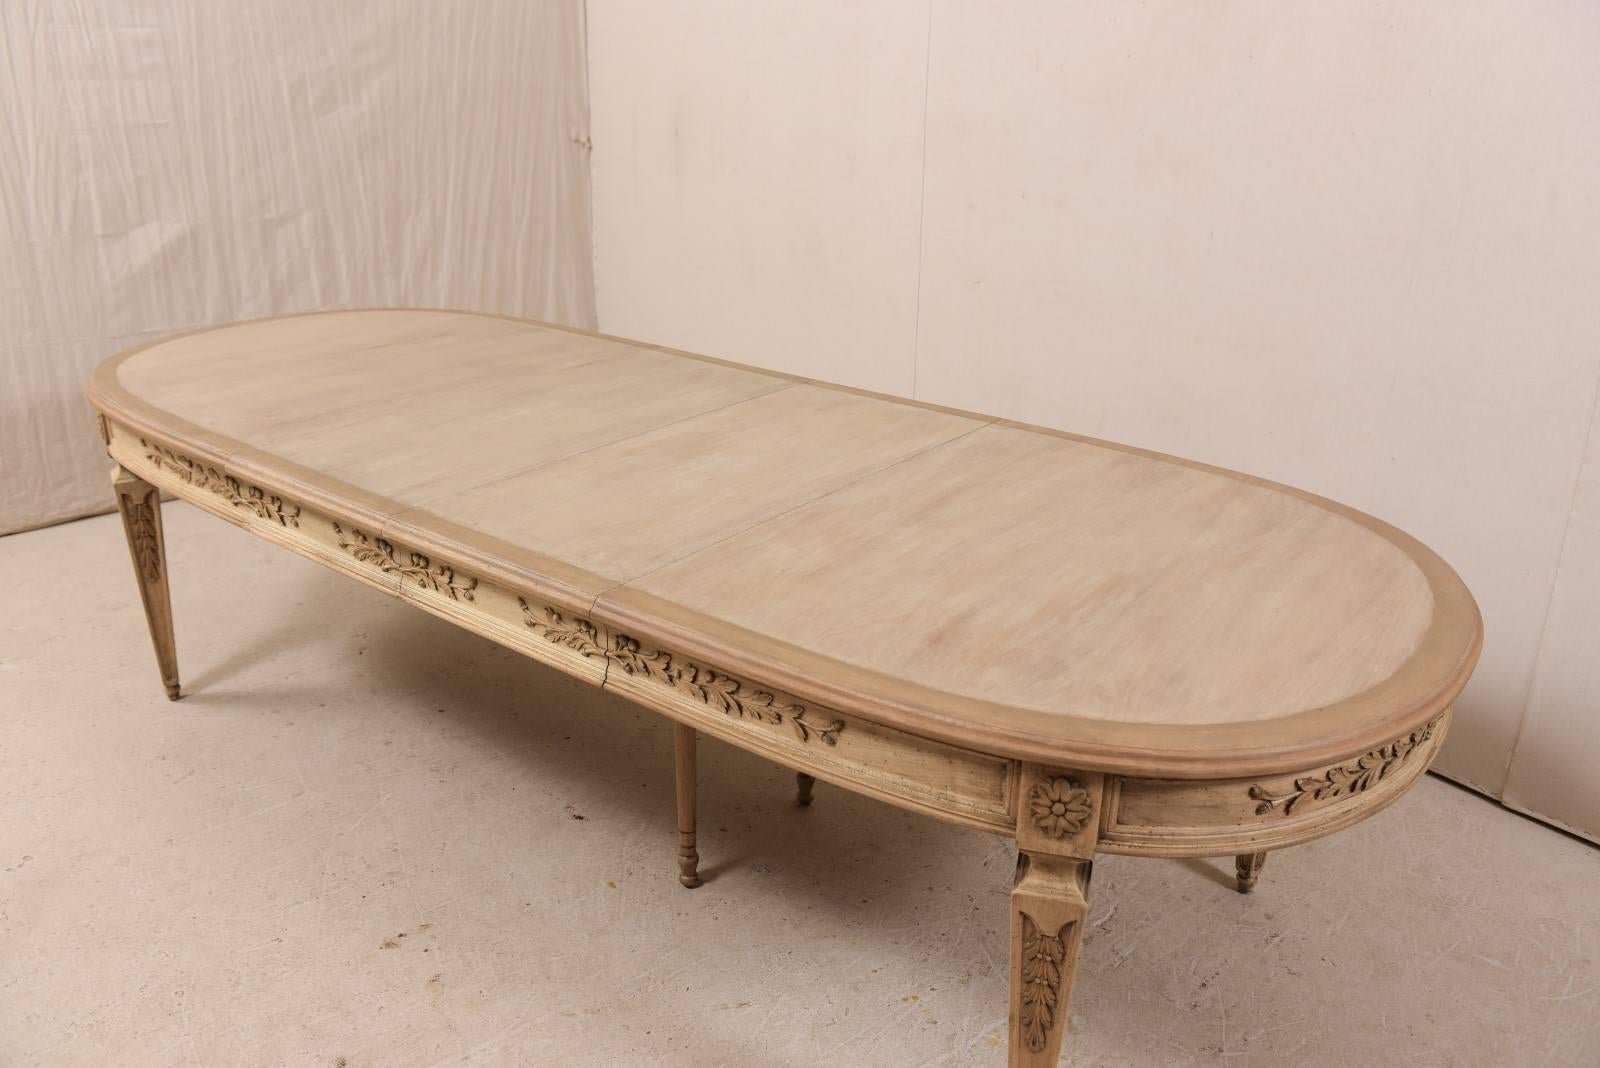 American Beautifully Carved Ash Wood Oval Dining Table with Removable Leaves